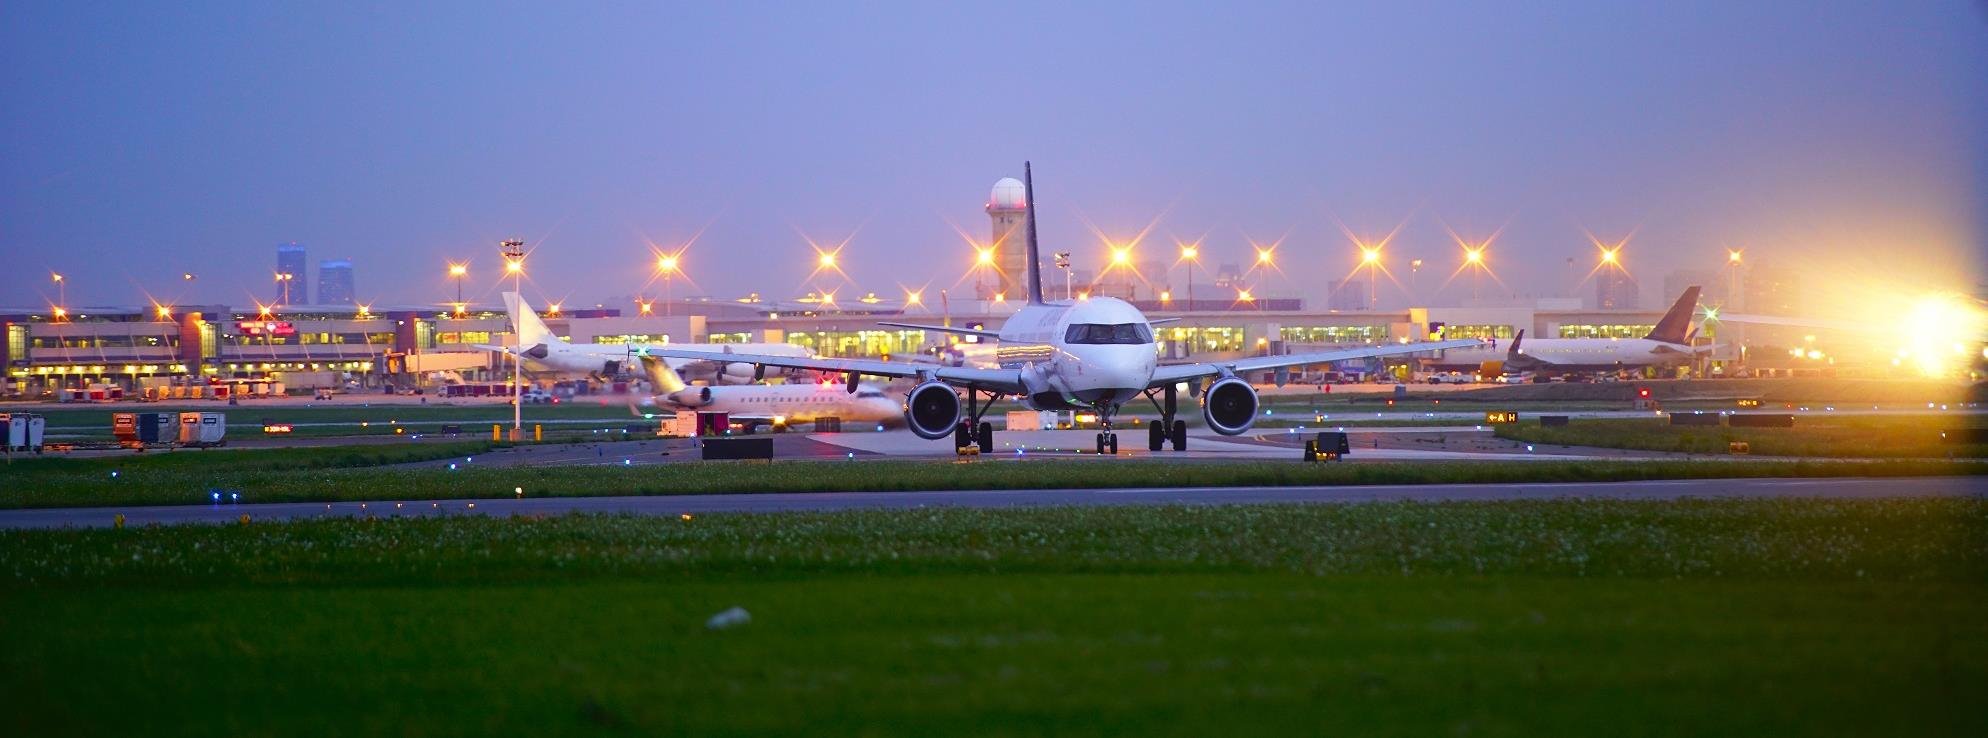 A passenger plane taxiing the runaway at night.